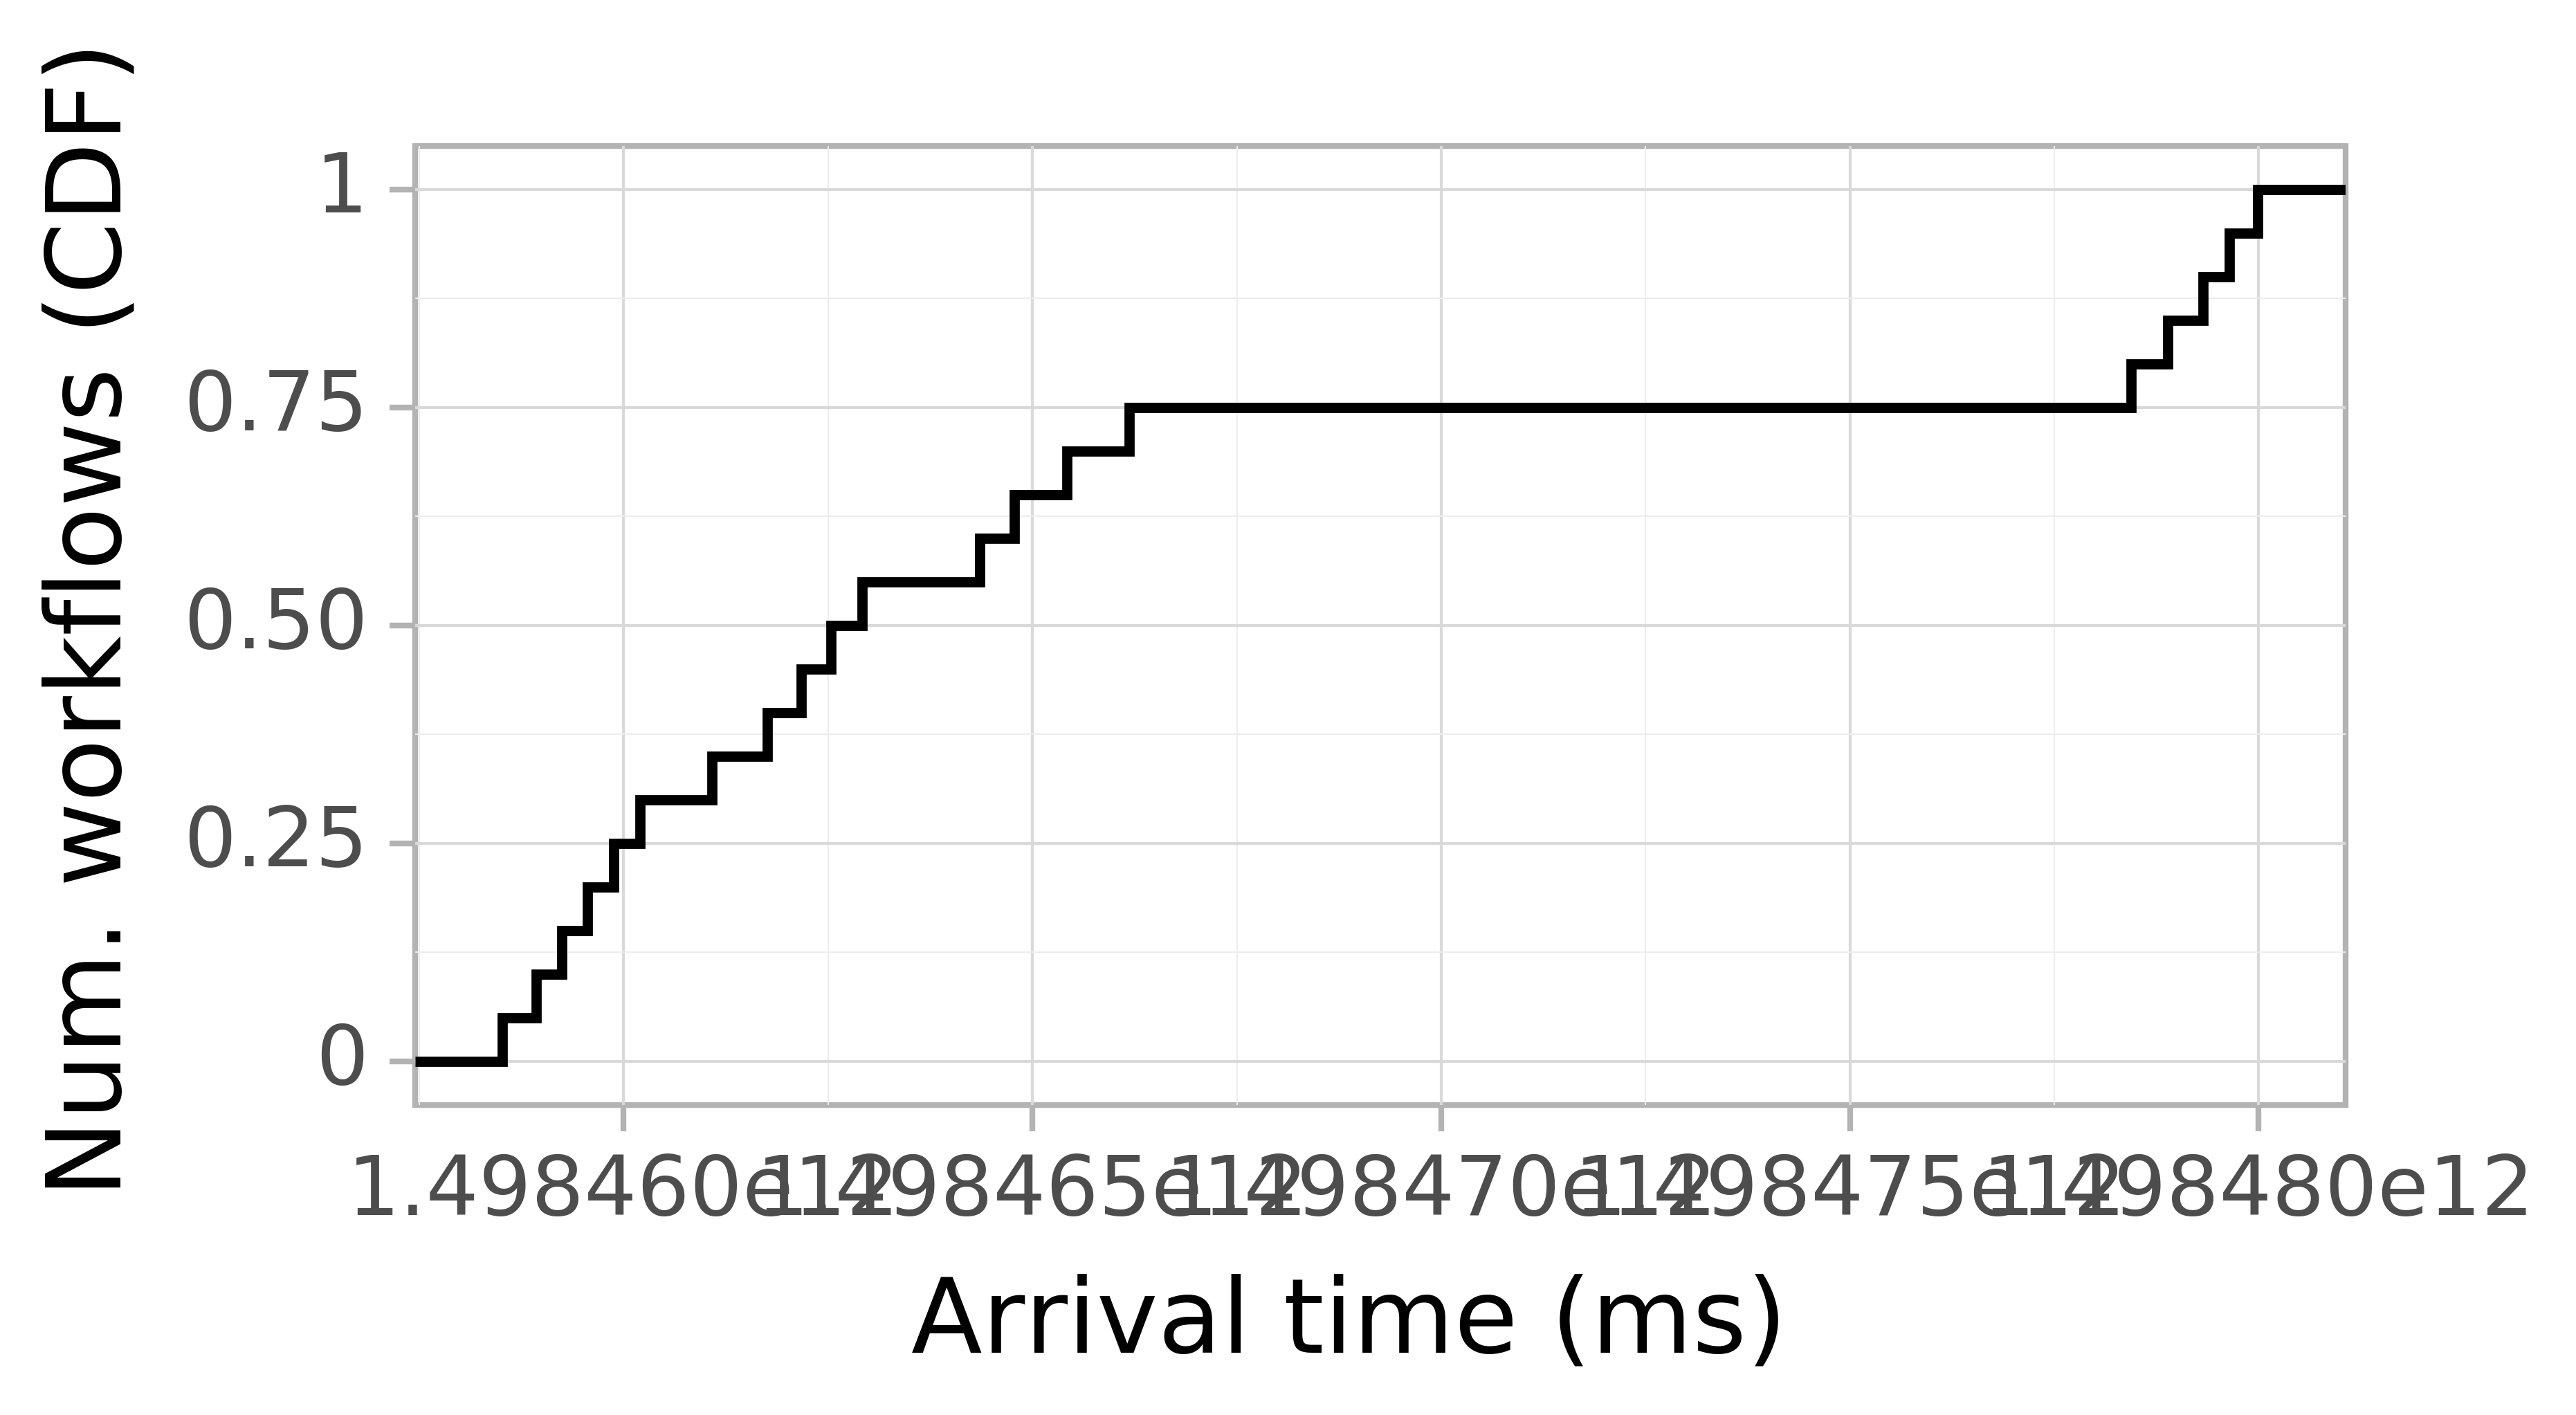 Job arrival CDF graph for the askalon-new_ee30 trace.